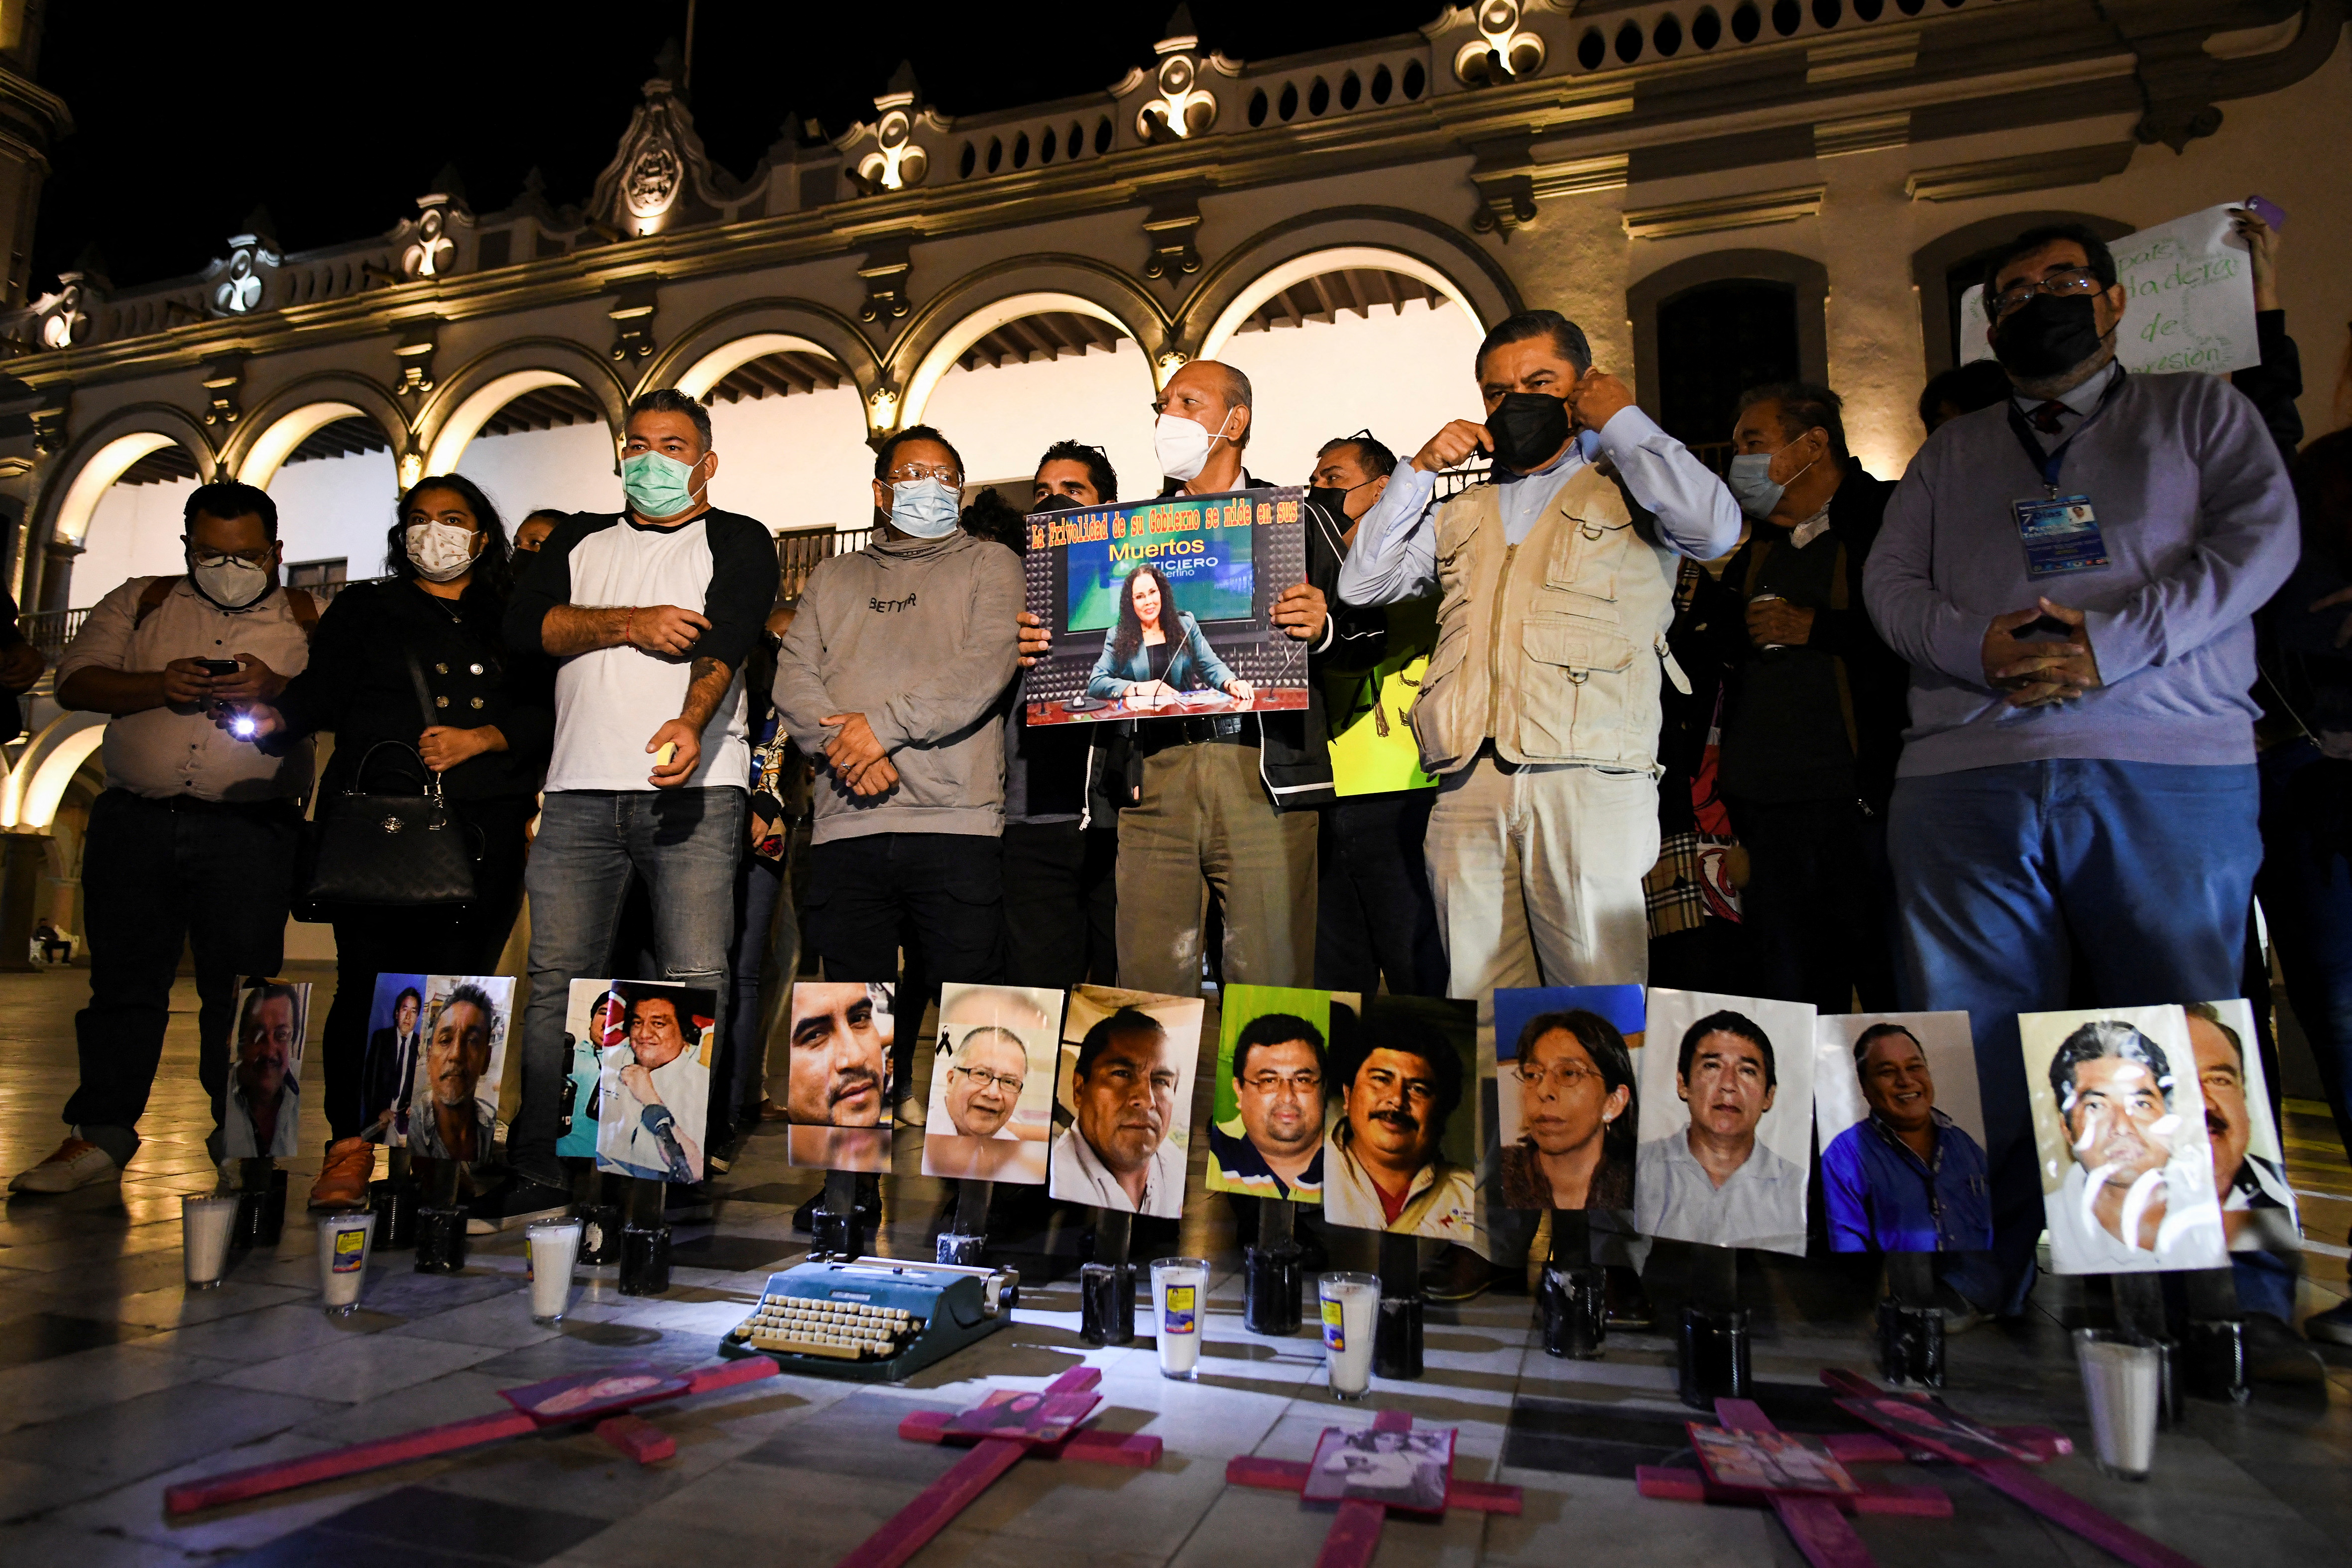 Mexican journalists gather around pictures of colleagues who have been murdered as they protest the recent killings of photojournalist Margarito Martinez and journalist Lourdes Maldonado, in Veracruz, Mexico January 25, 2022. REUTERS/Yahir Ceballos